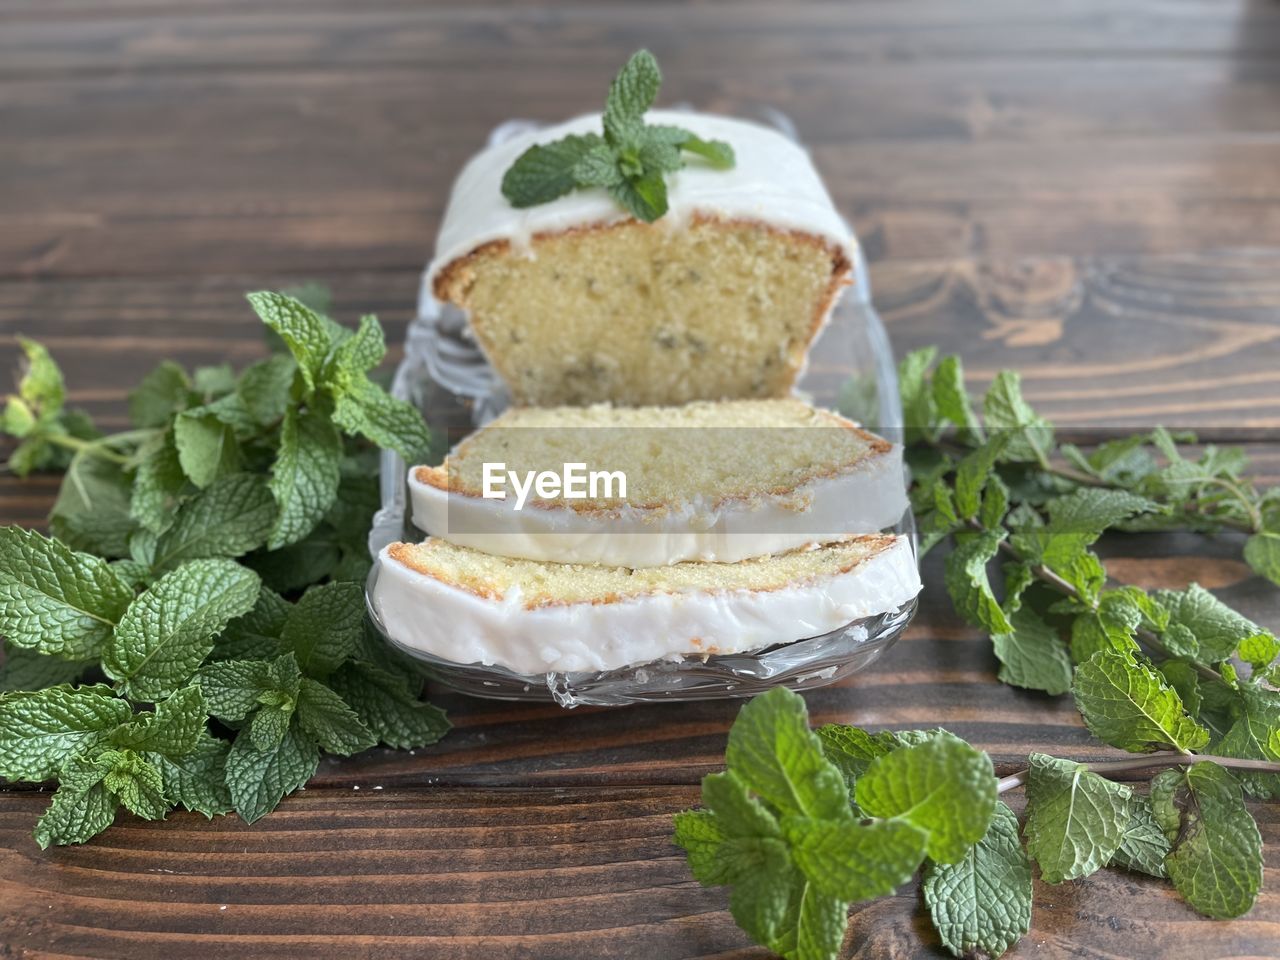 food, food and drink, wood, freshness, healthy eating, leaf, herb, plant part, dish, baked, dessert, dairy, wellbeing, no people, produce, indoors, mint leaf - culinary, sweet food, vegetable, fast food, cake, birthday cake, table, plant, green, sweet, studio shot, fruit, nature, garnish